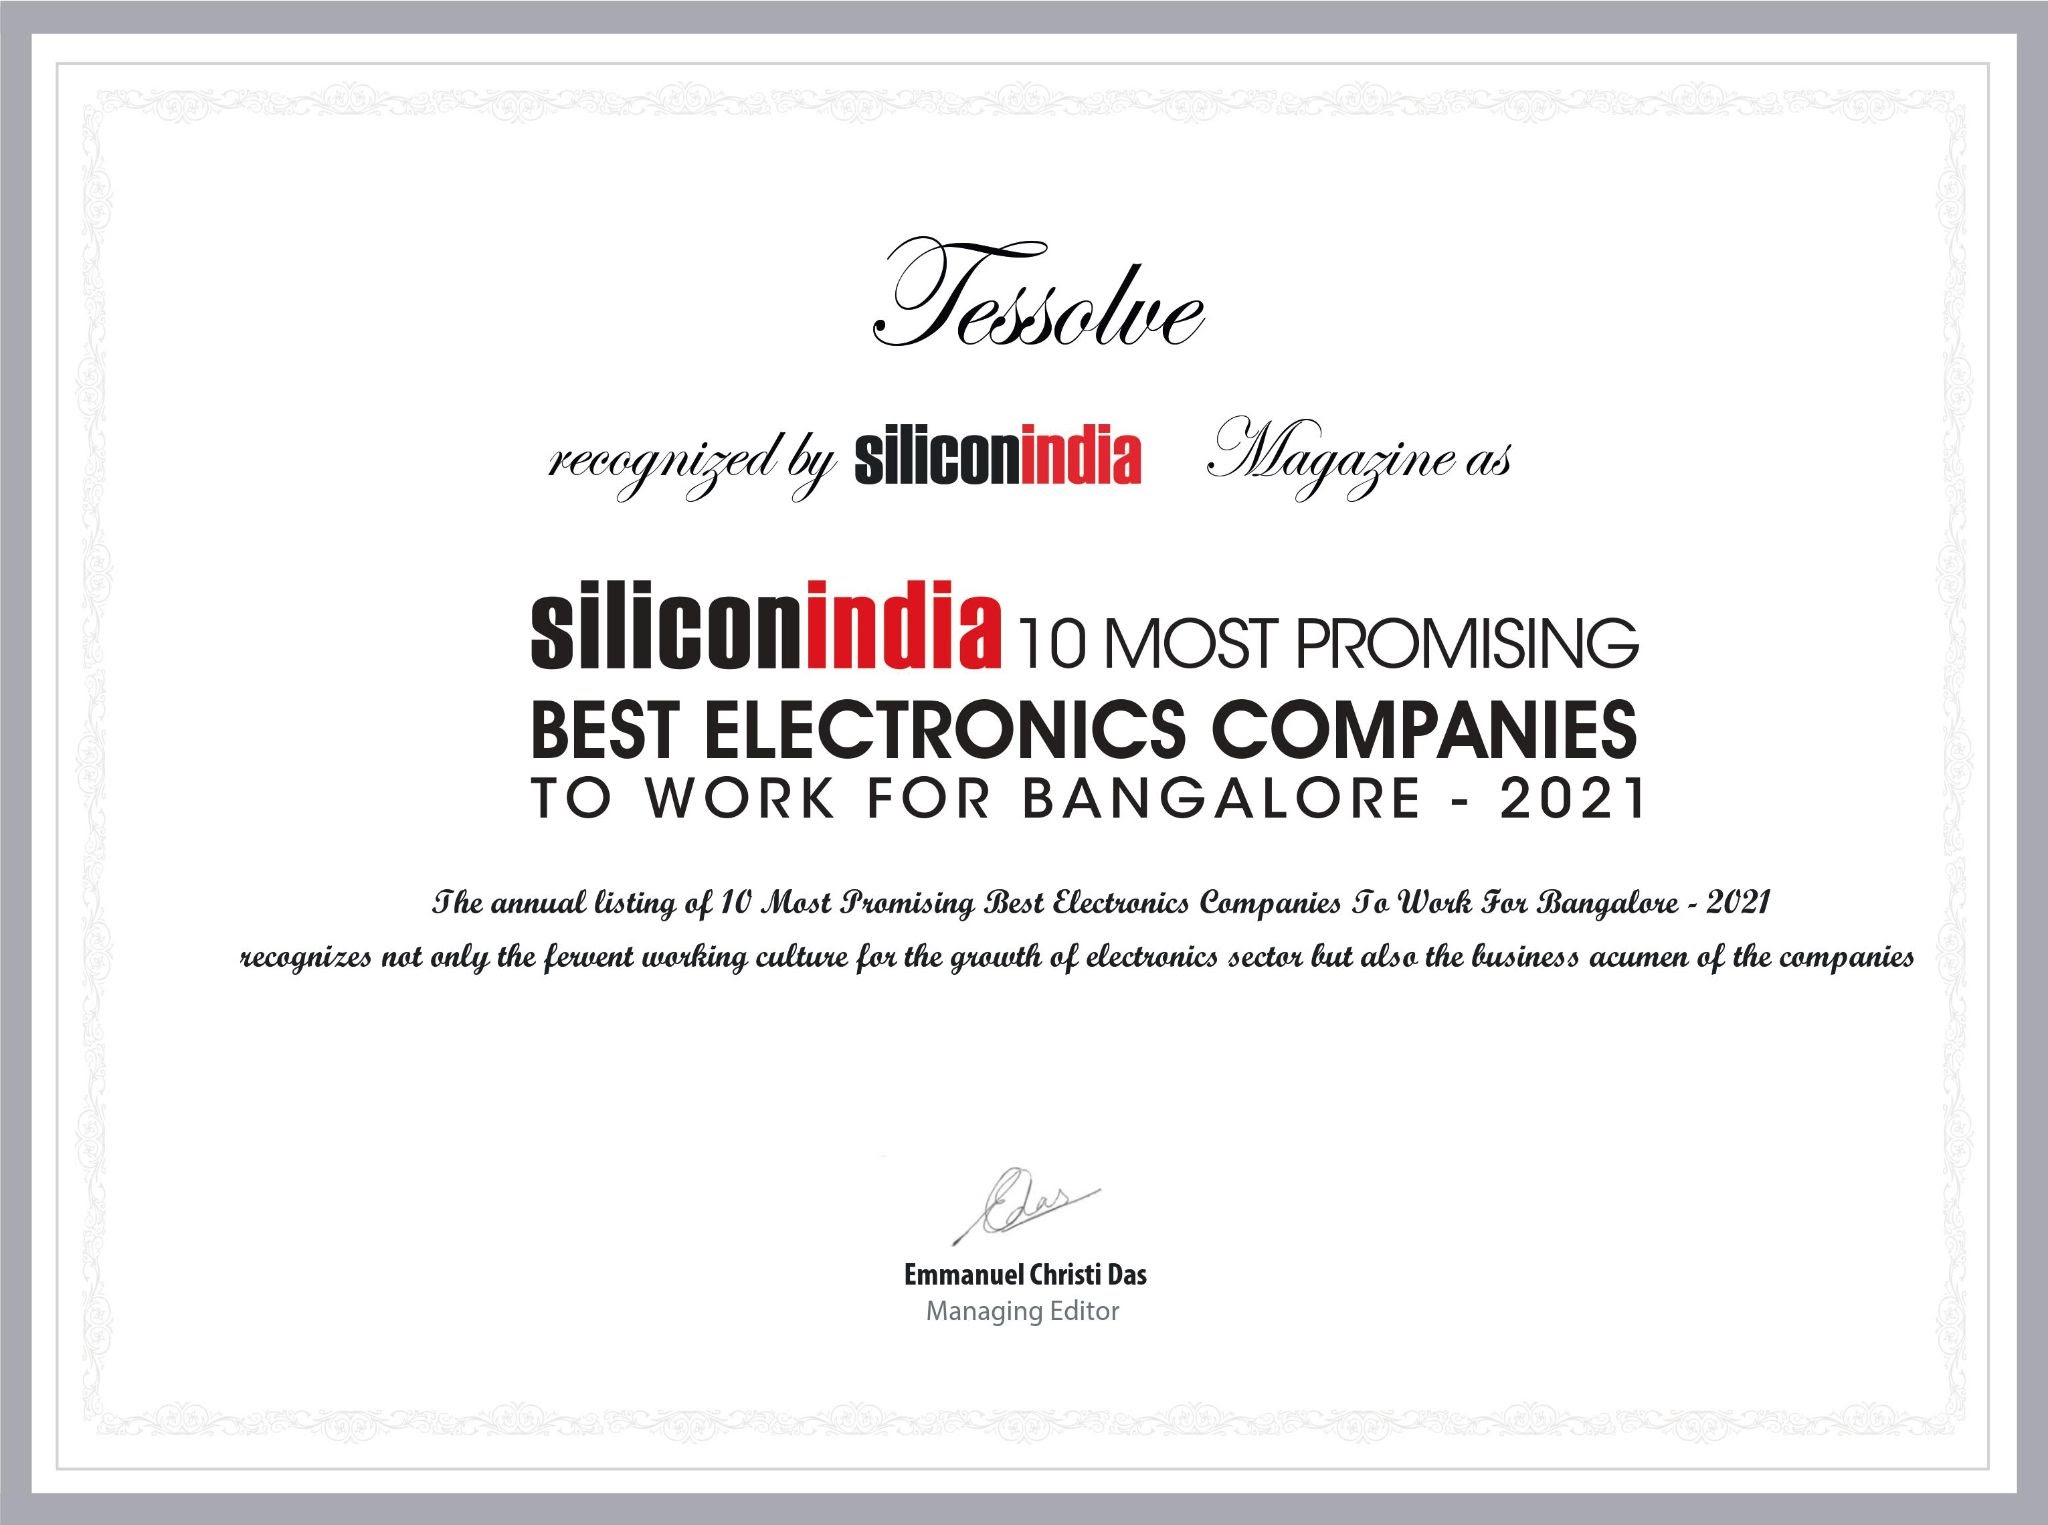 Tessolve is recognized and featured by SiliconIndia among The 10 Best Electronics Companies to Work For in Bangalore 2021.